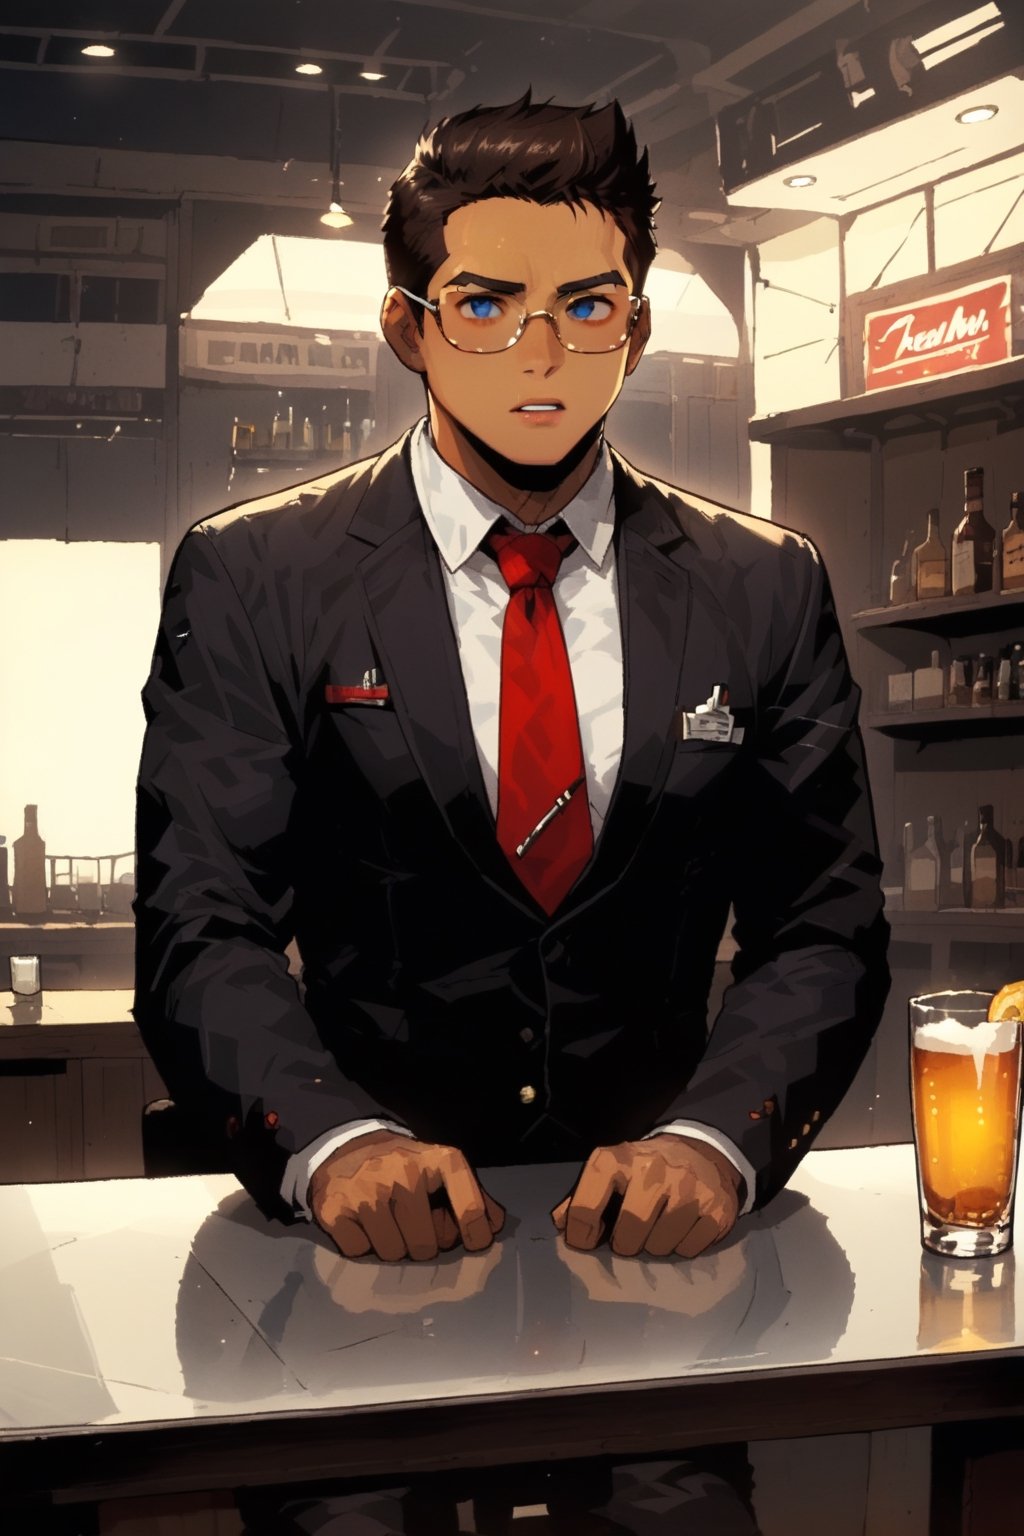 score_9, score_8, score_7, 1man(young, handsome, wearing black business suit with red tie, cowbow hat, glasses, glowing pip-boy on his left arm, tan skin, middle eastern, tall, muscles, strong jaw, sharp cheekbones, thin lips, blue eyes), sitting, glass of wishkey and bottle on the table, inside a Western saloon bar, indoor,falloutcinematic, retro futurism